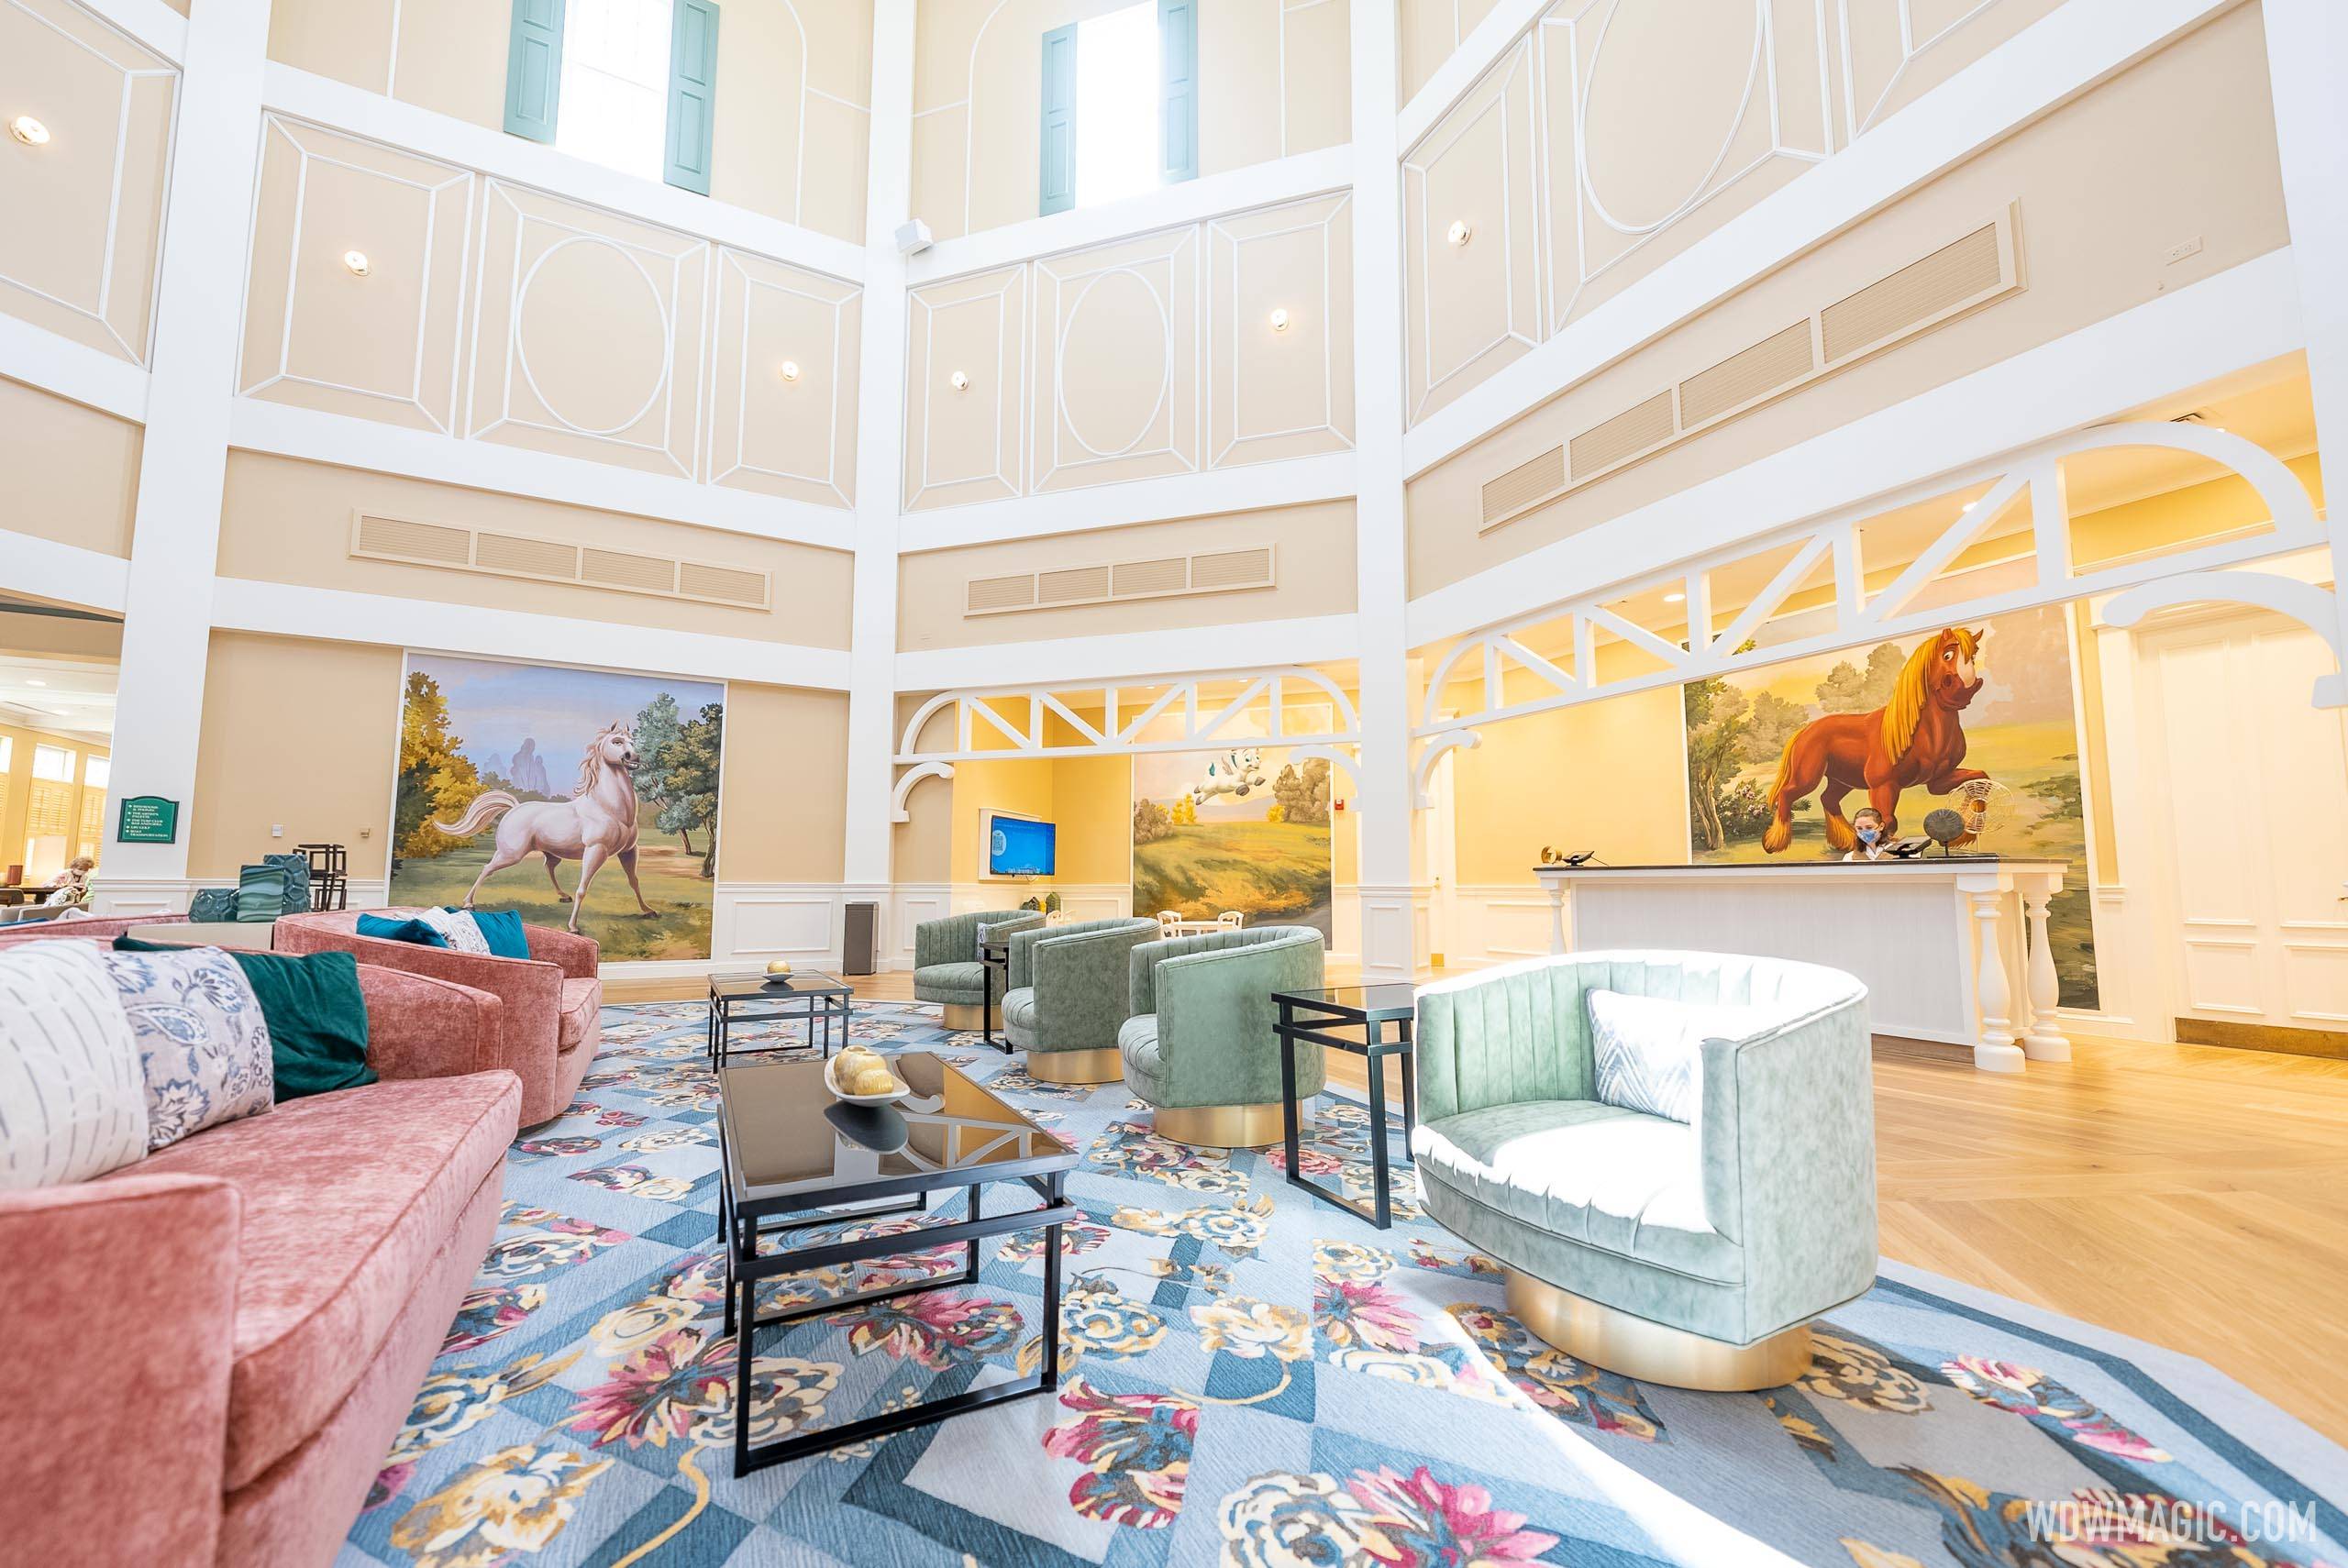 A look inside the all-new lobby at Disney's Saratoga Springs Resort